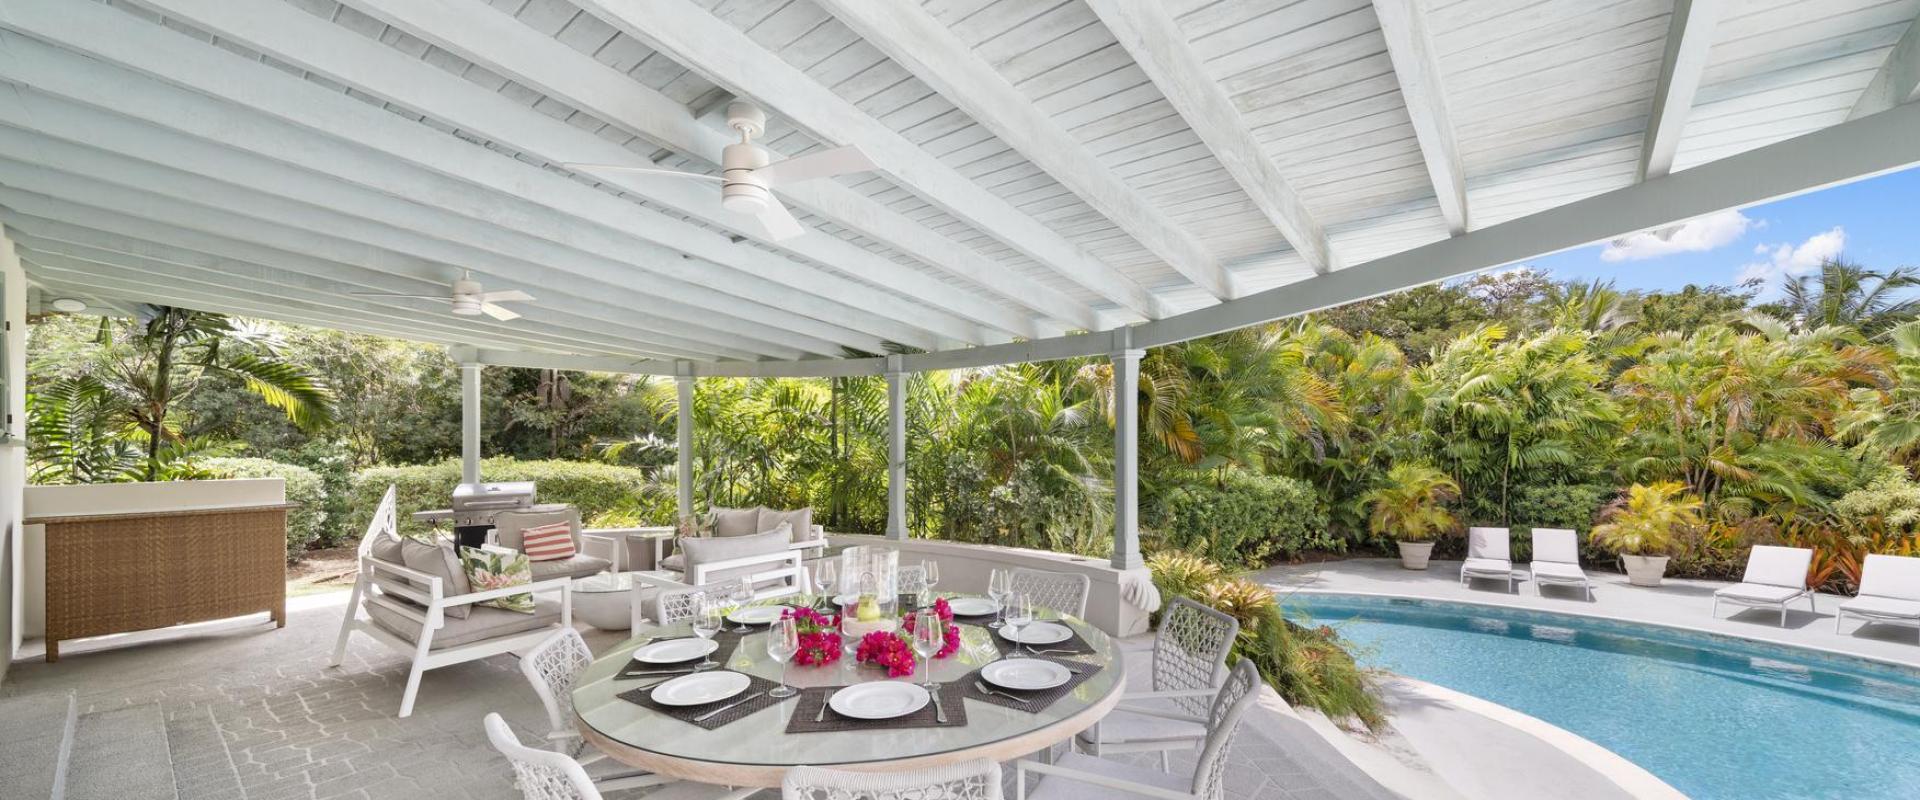 Phoenix Villa Sandy Lane Barbados Covered Patio with Dining, Bar and Pool